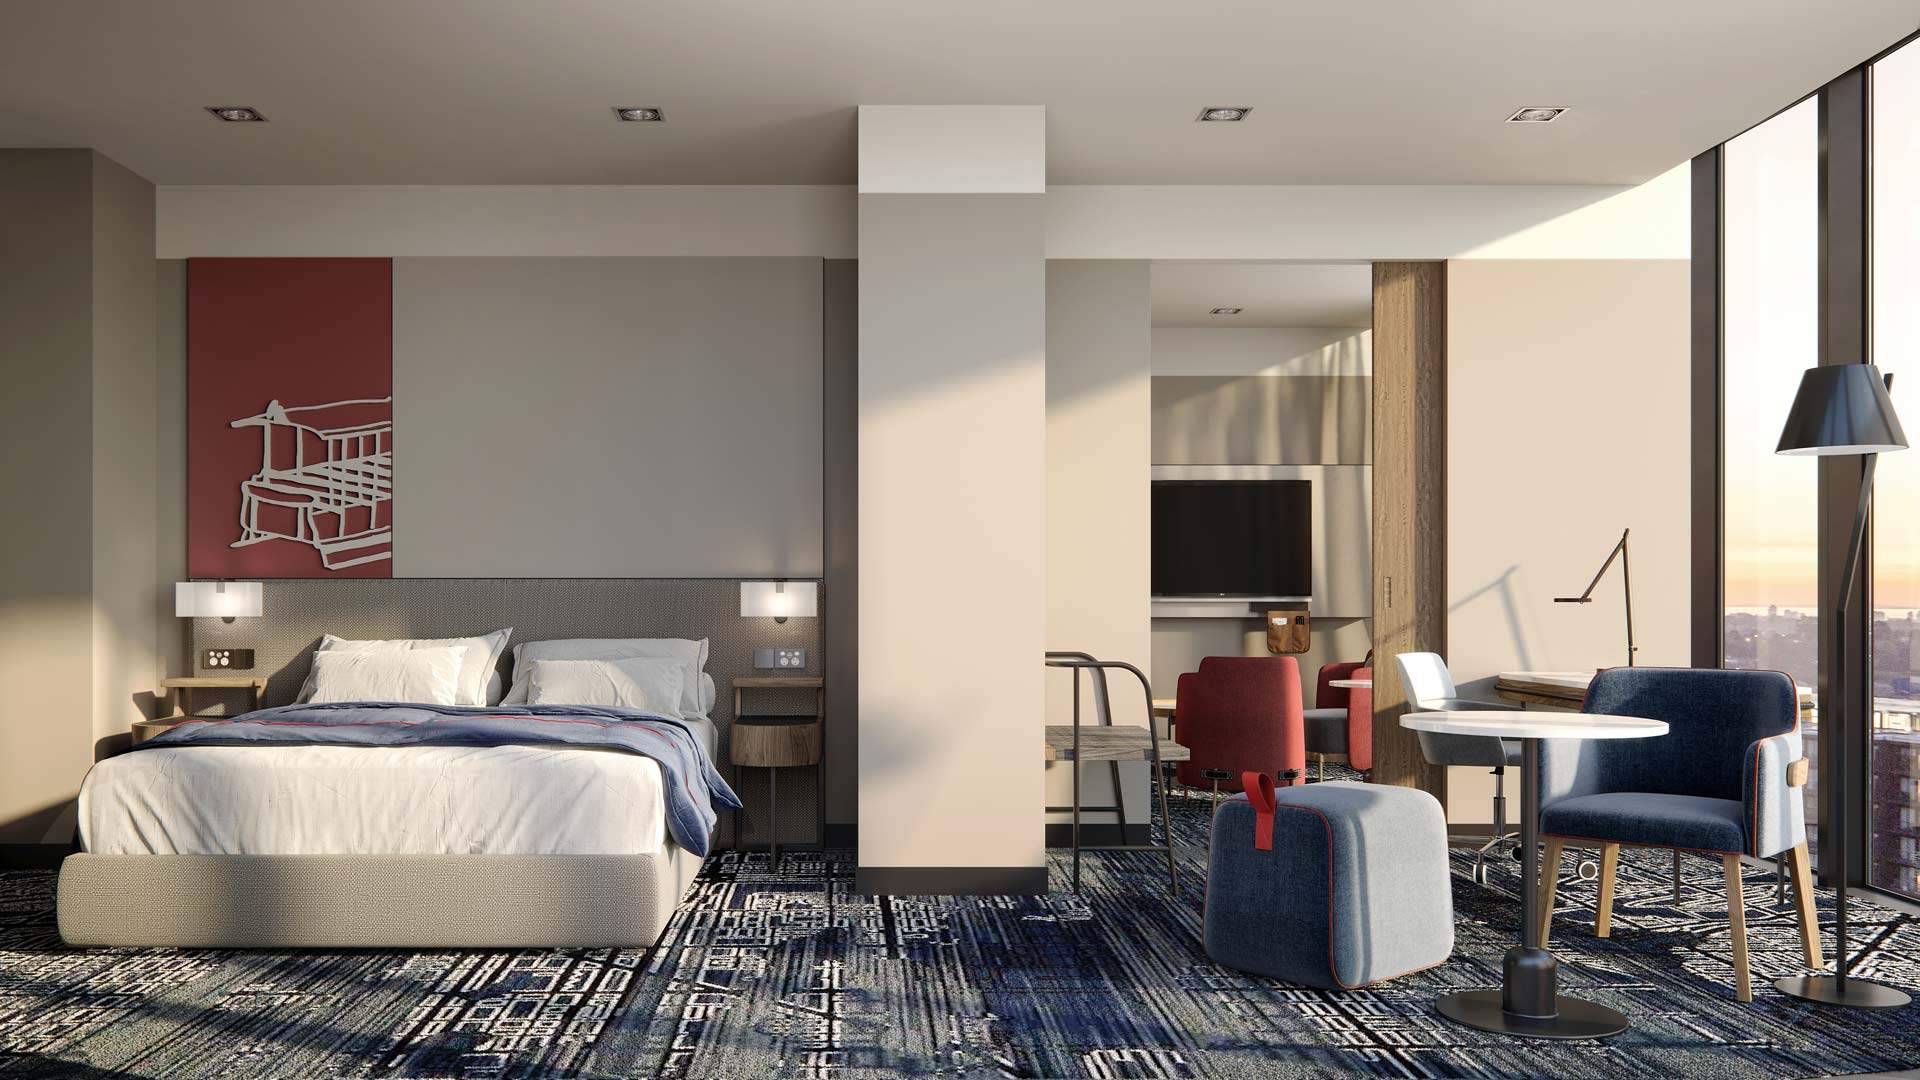 Melbourne Is Getting a New Hotel Above a Bunnings So You Can Rise and Snag